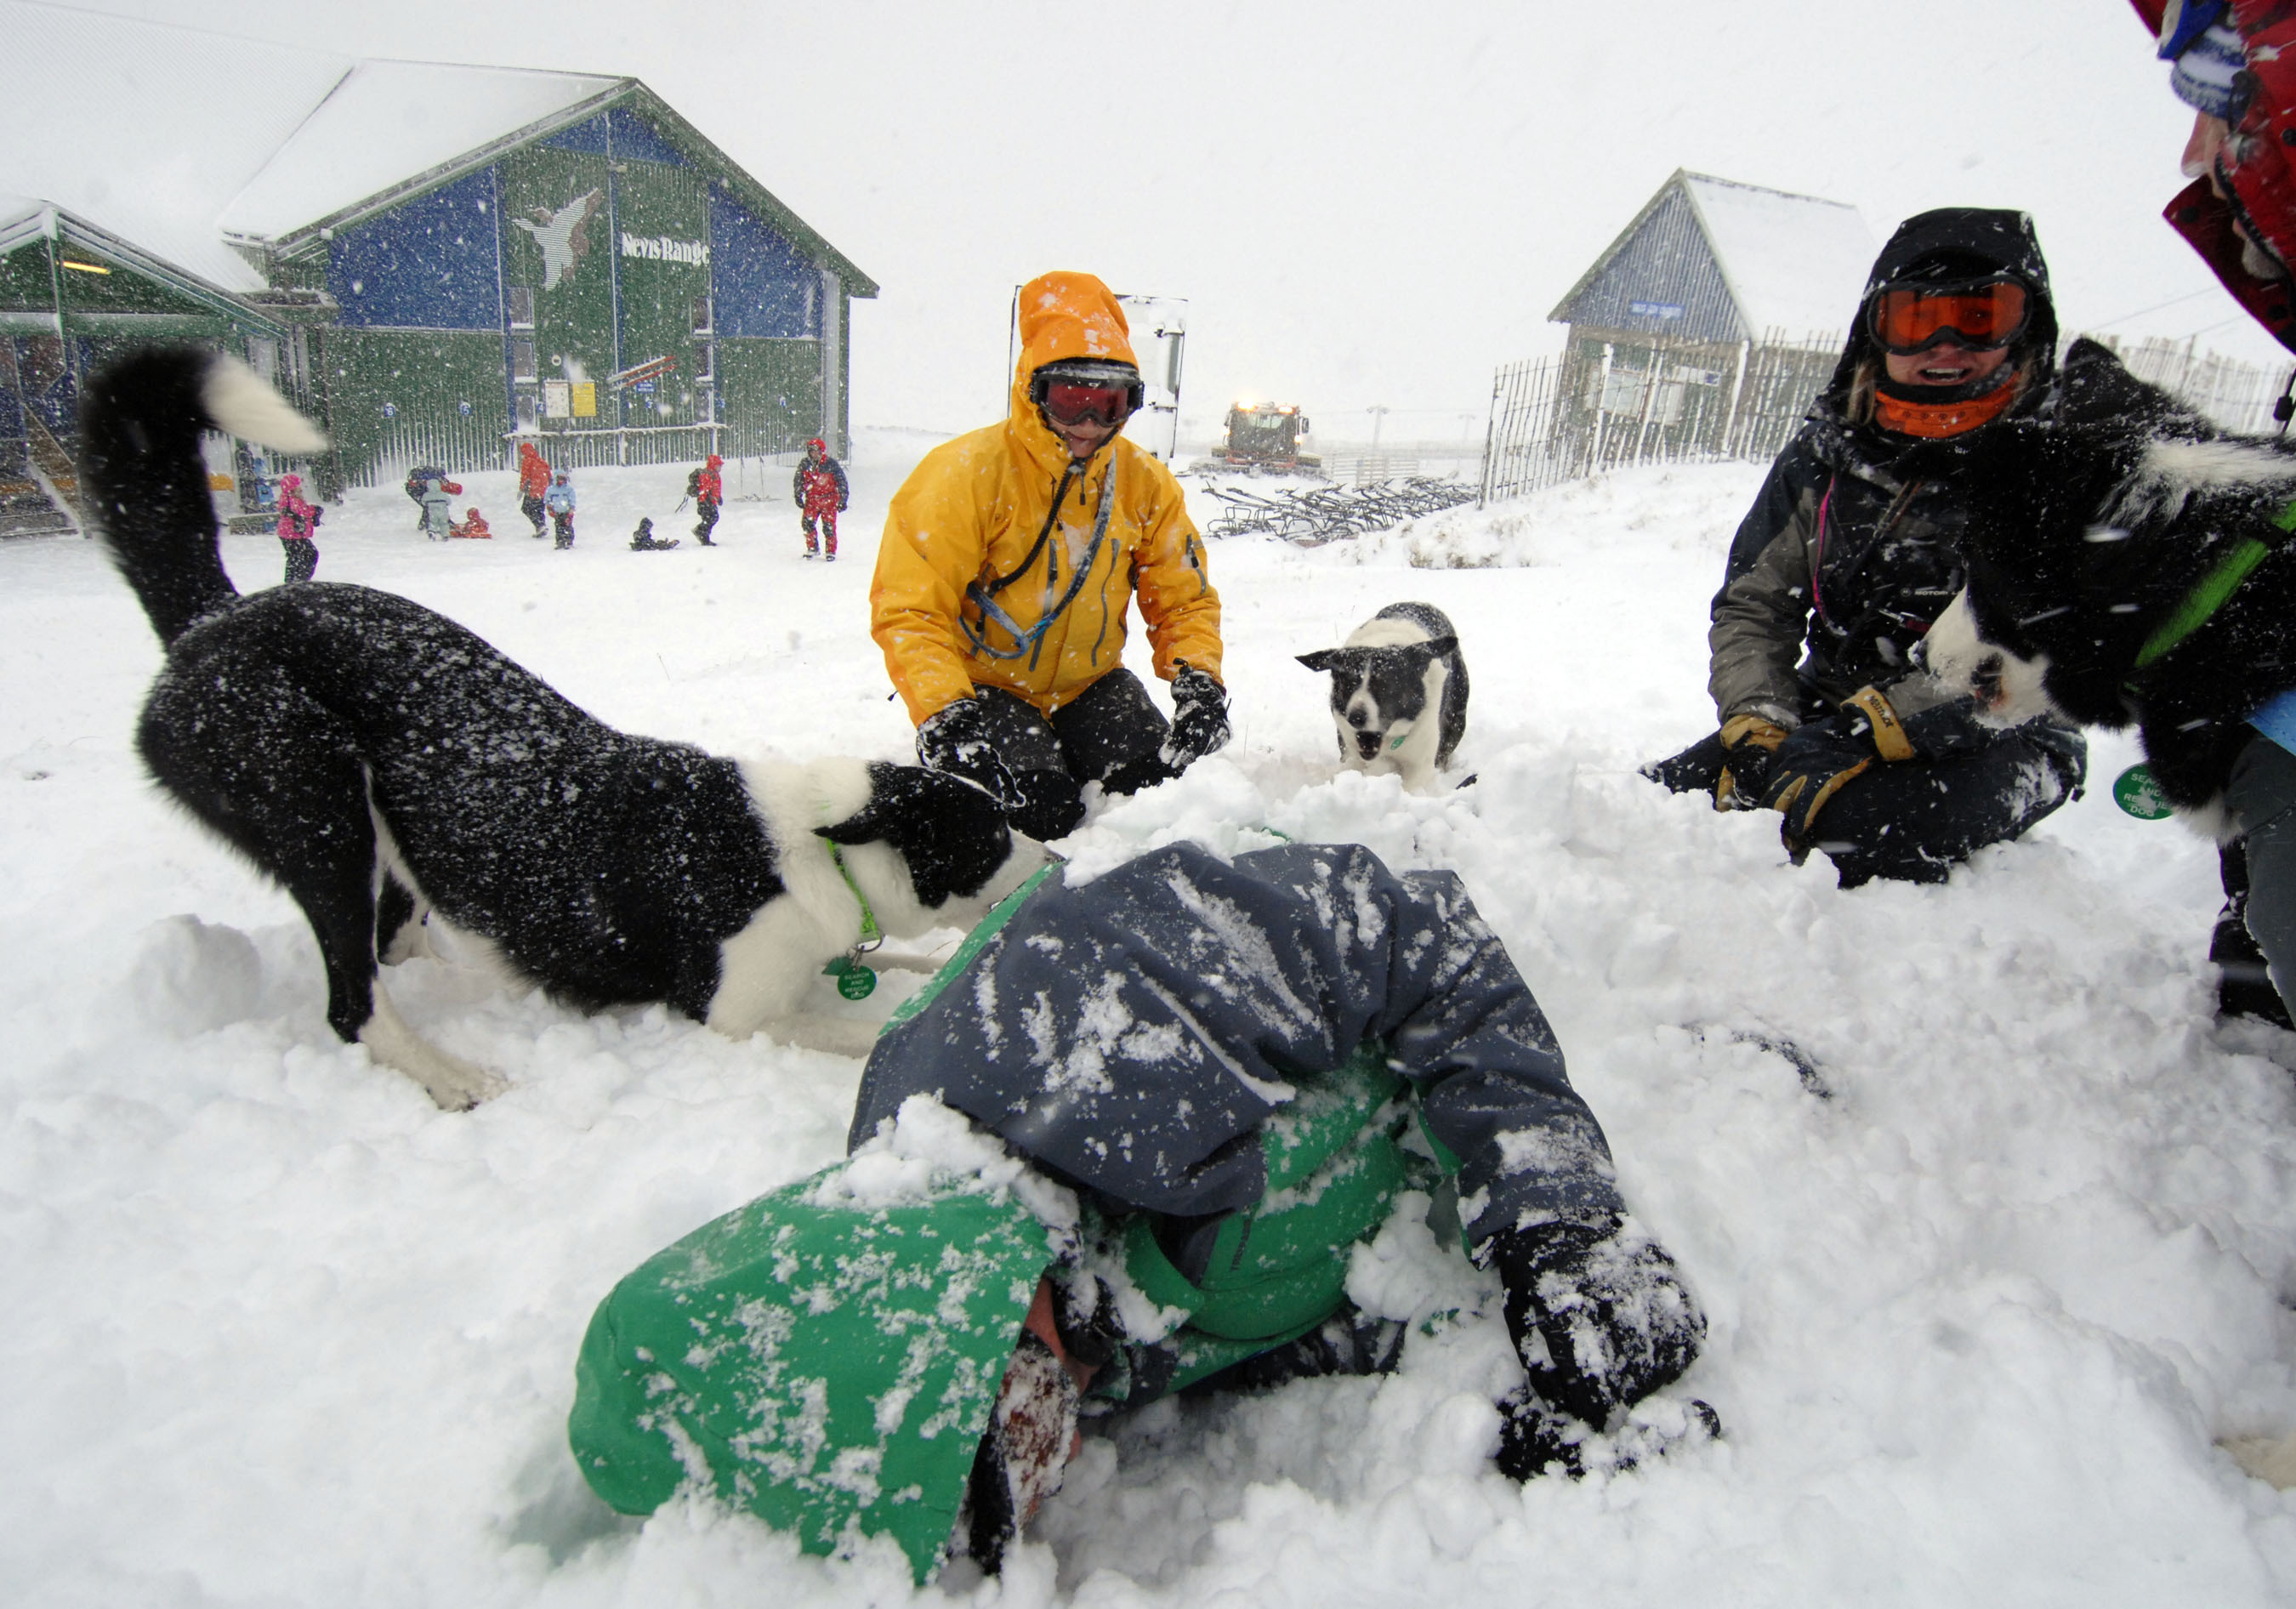 Member of the Search and Rescue Dogs Association (SARDA) Scotland taking part in a training exercise at Nevis Range